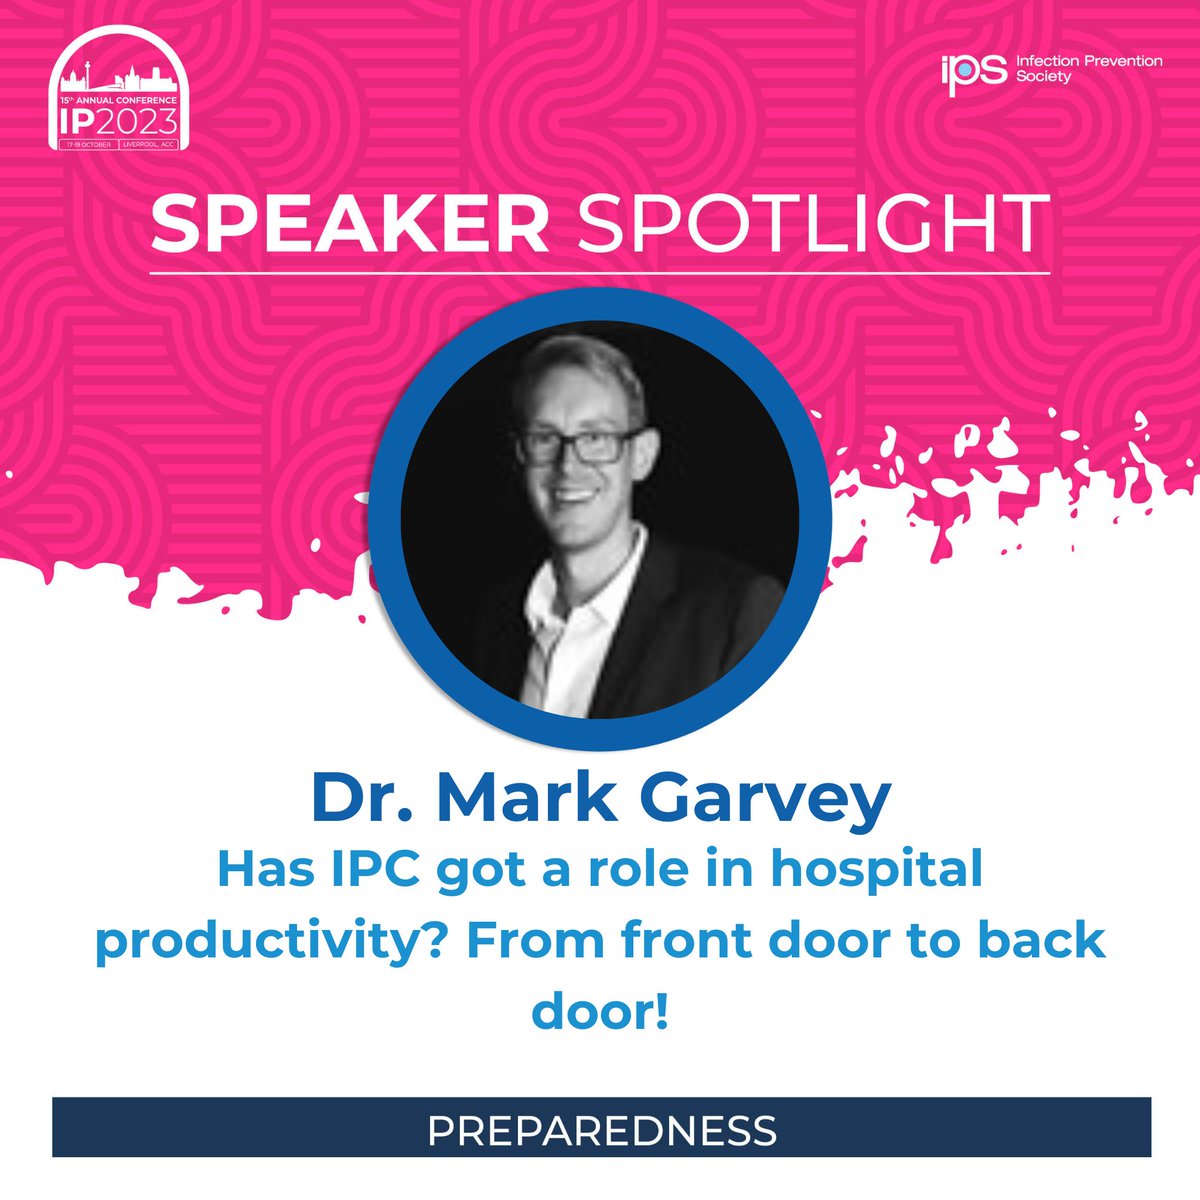 We are looking forward to Dr. Mark Garvey's presentation ''Has IPC got a role in hospital productivity? From front door to back door!'' at #IP2023conf